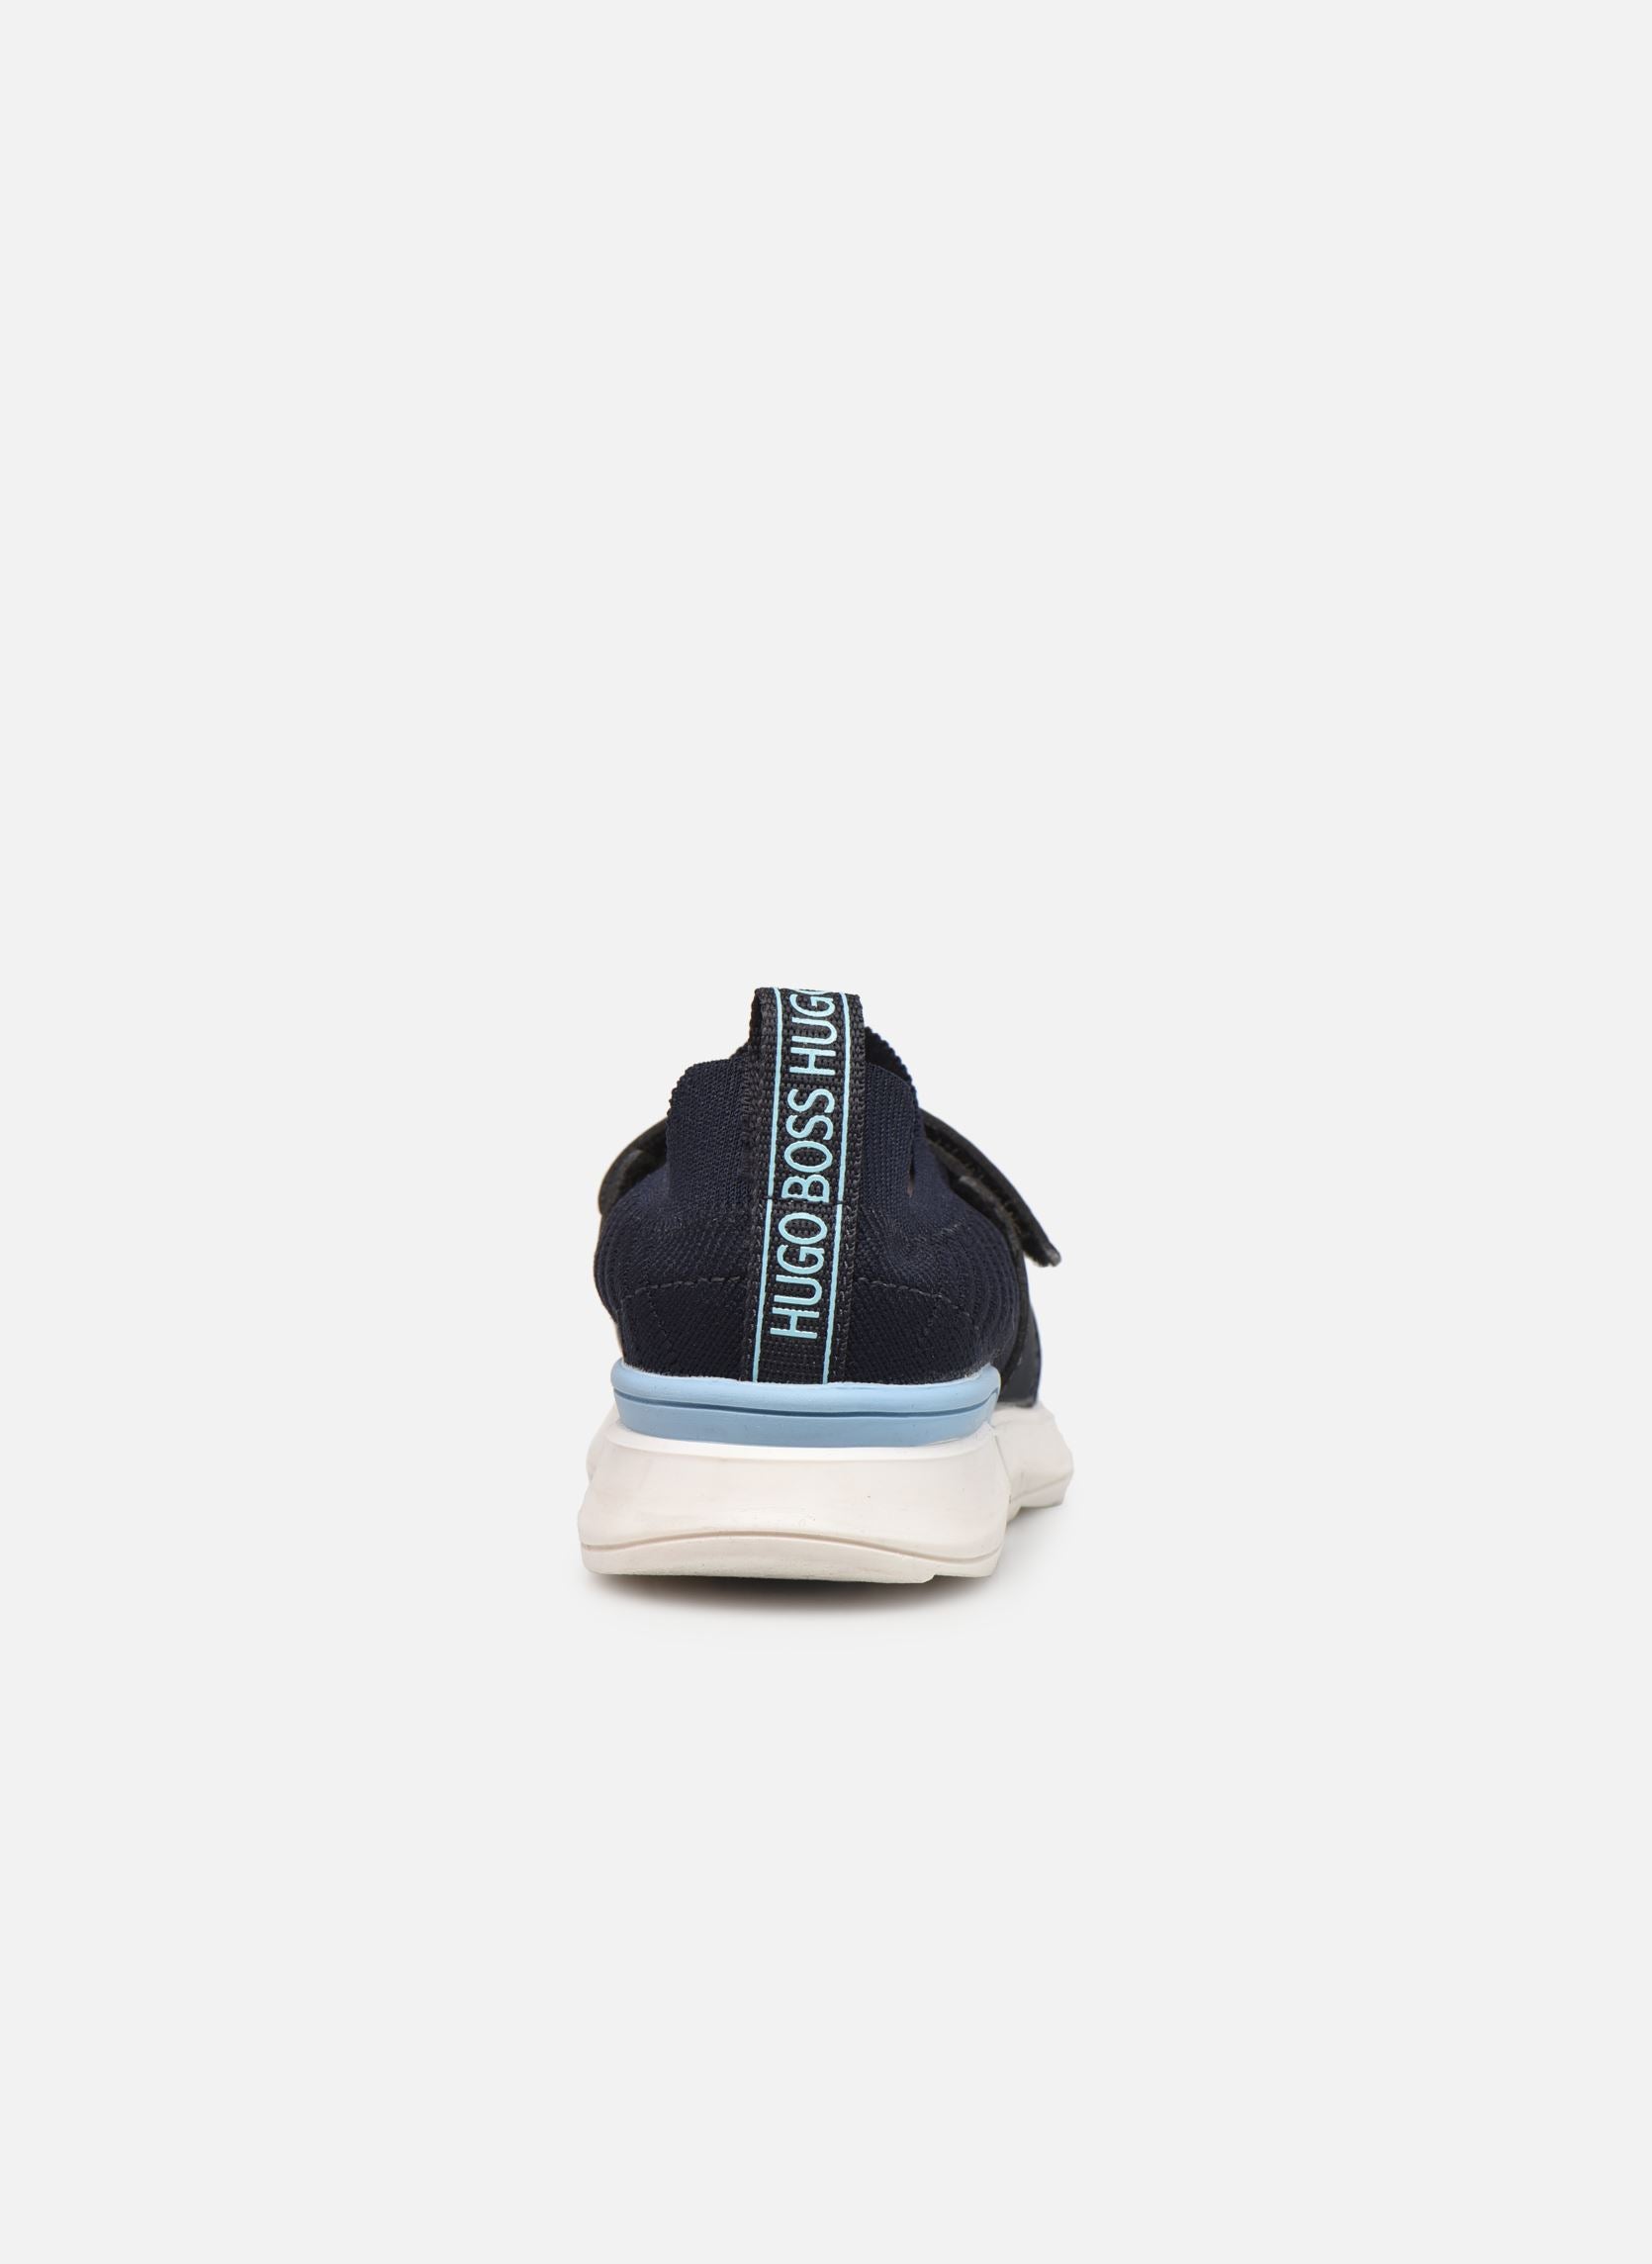 BOYS SNEAKER WITH PRINTED LOGO ON STRAP,NAVY - Cémarose Canada